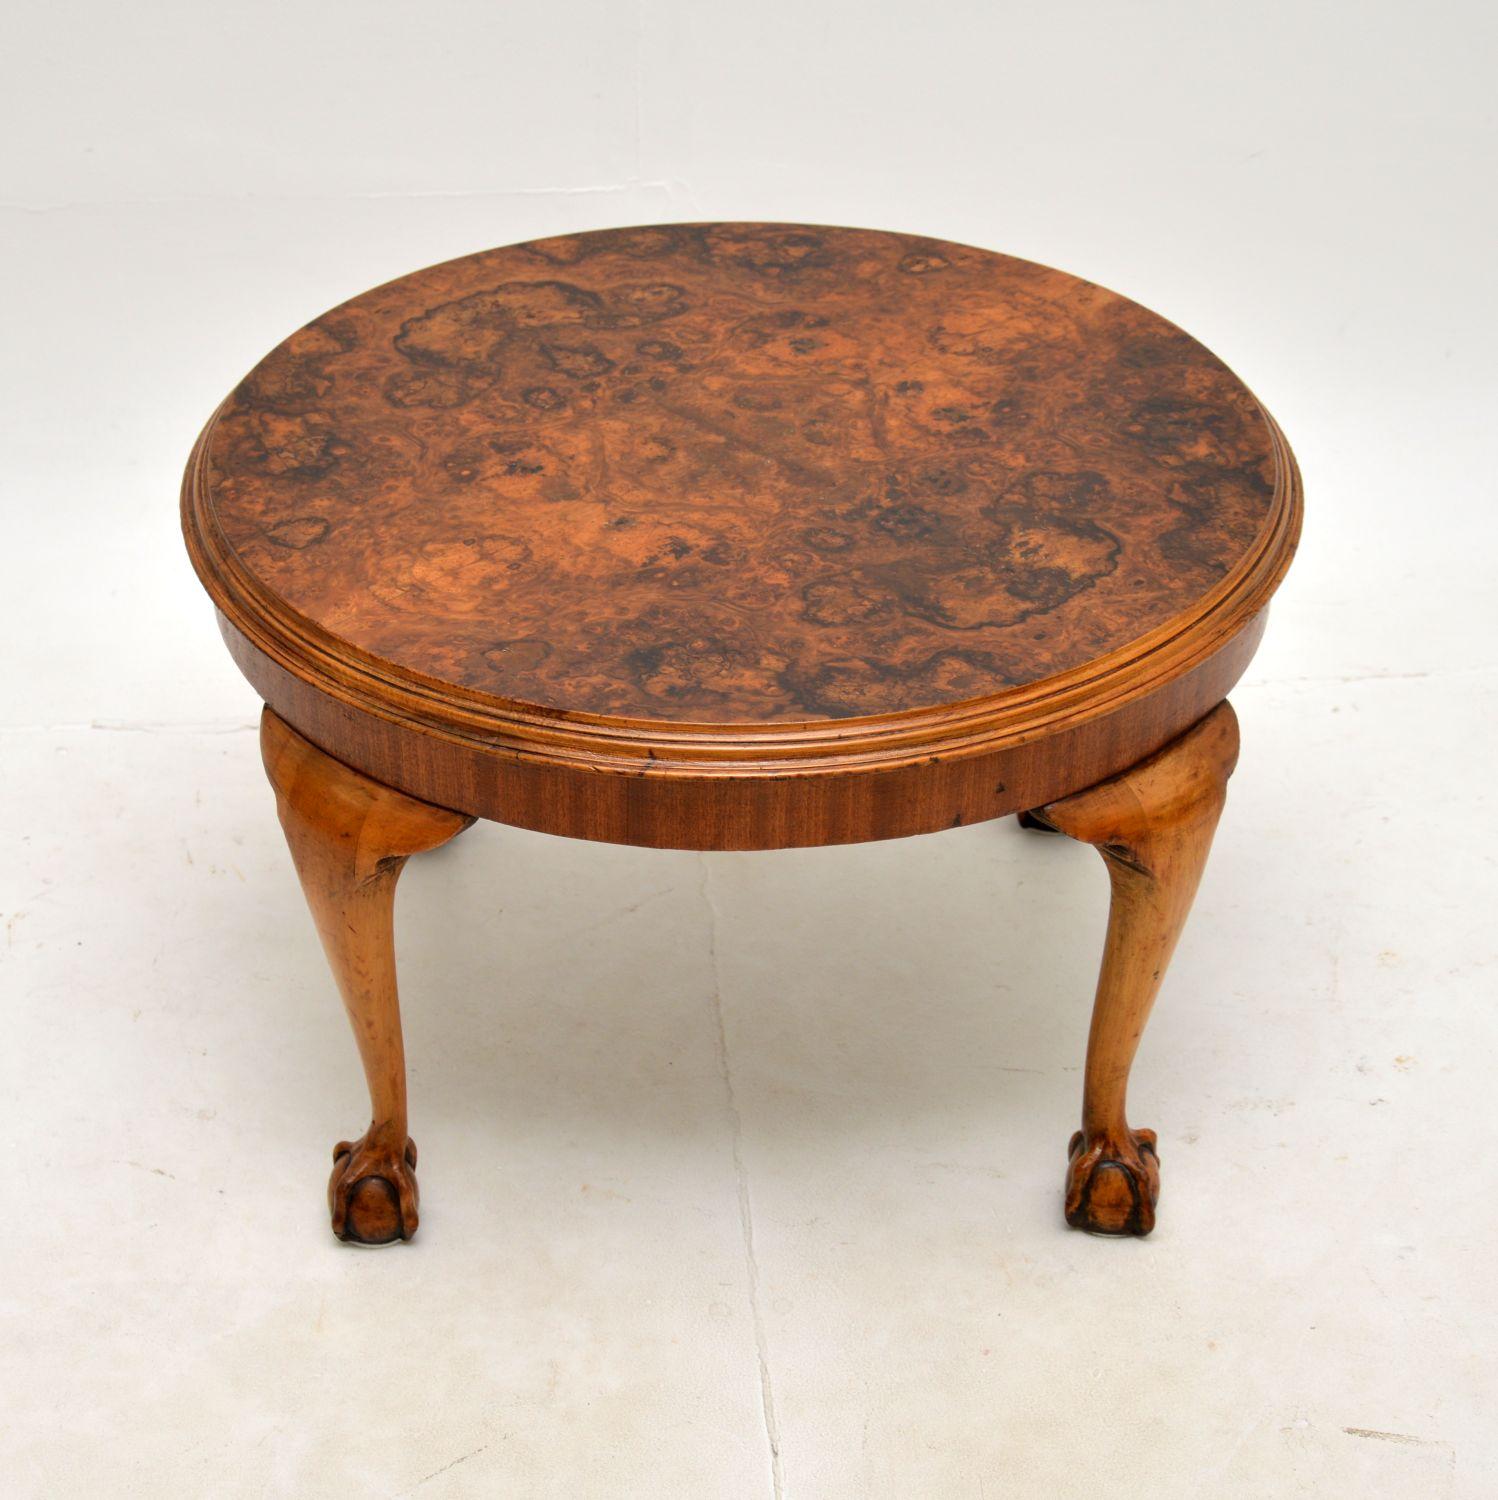 A wonderful antique burr walnut coffee table, made in England and dating from the 1920-30’s.

It is of superb quality and is a very useful size. The circular top has absolutely gorgeous butt walnut grain patterns, this sits on cabriole legs